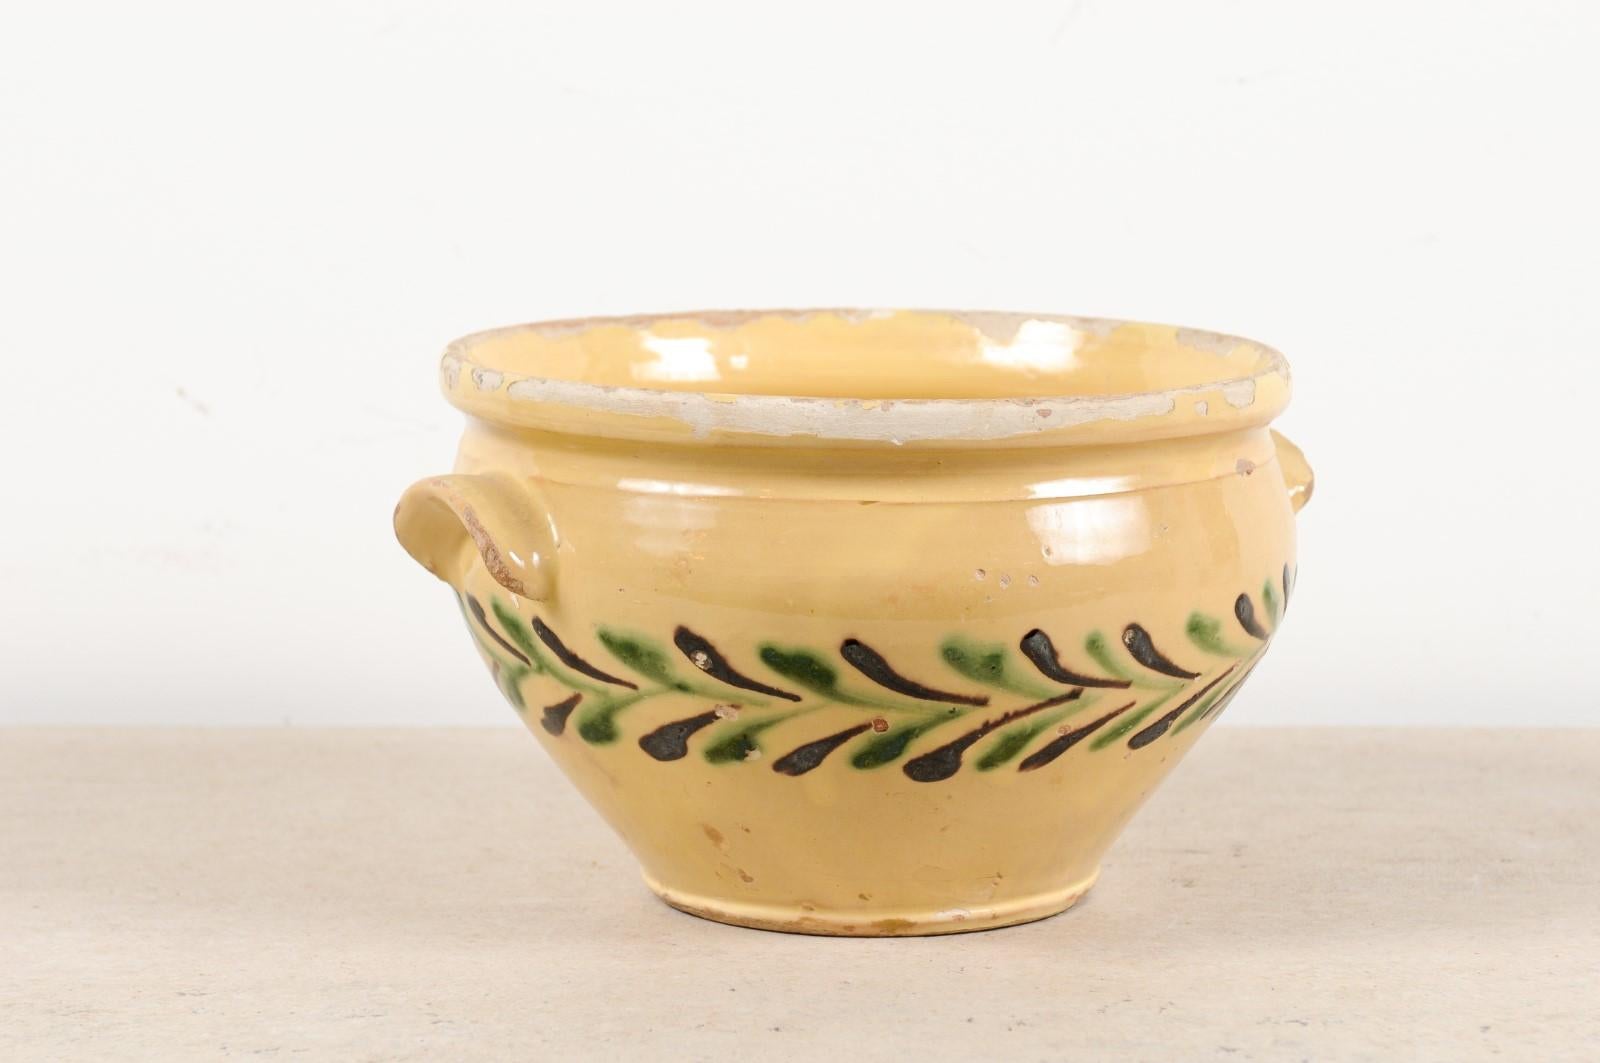 A French jaspe pottery bowl from the 19th century, with olive tree leaf motifs. Crafted in France during the 19th century, this jaspe pottery bowl features a circular silhouette, adorned with stylized olive tree leaf motifs, standing out beautifully